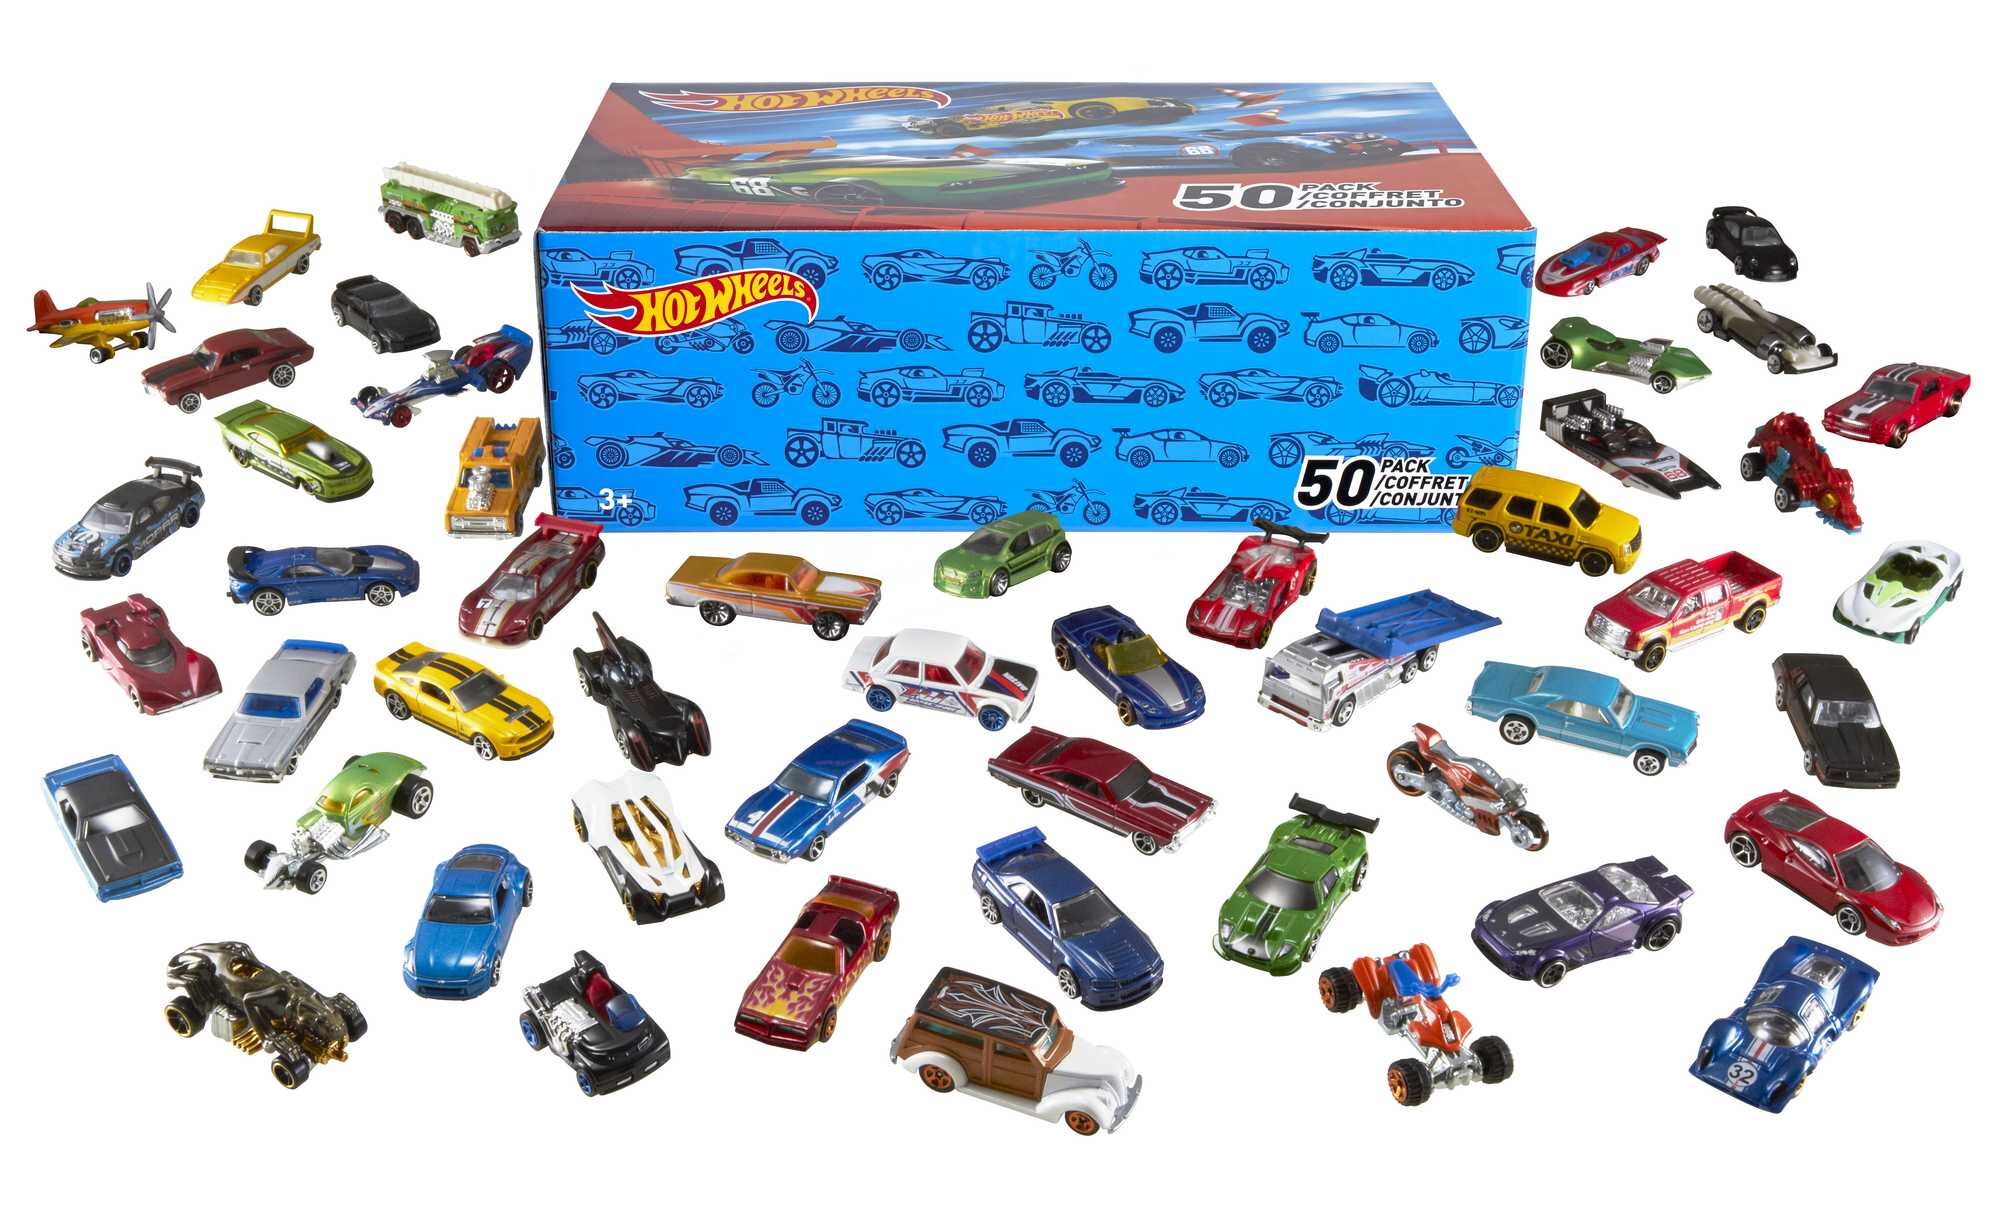 Hot Wheels Cars, Toy Trucks and Cars Individually Packaged, Set of 50 - image 1 of 7